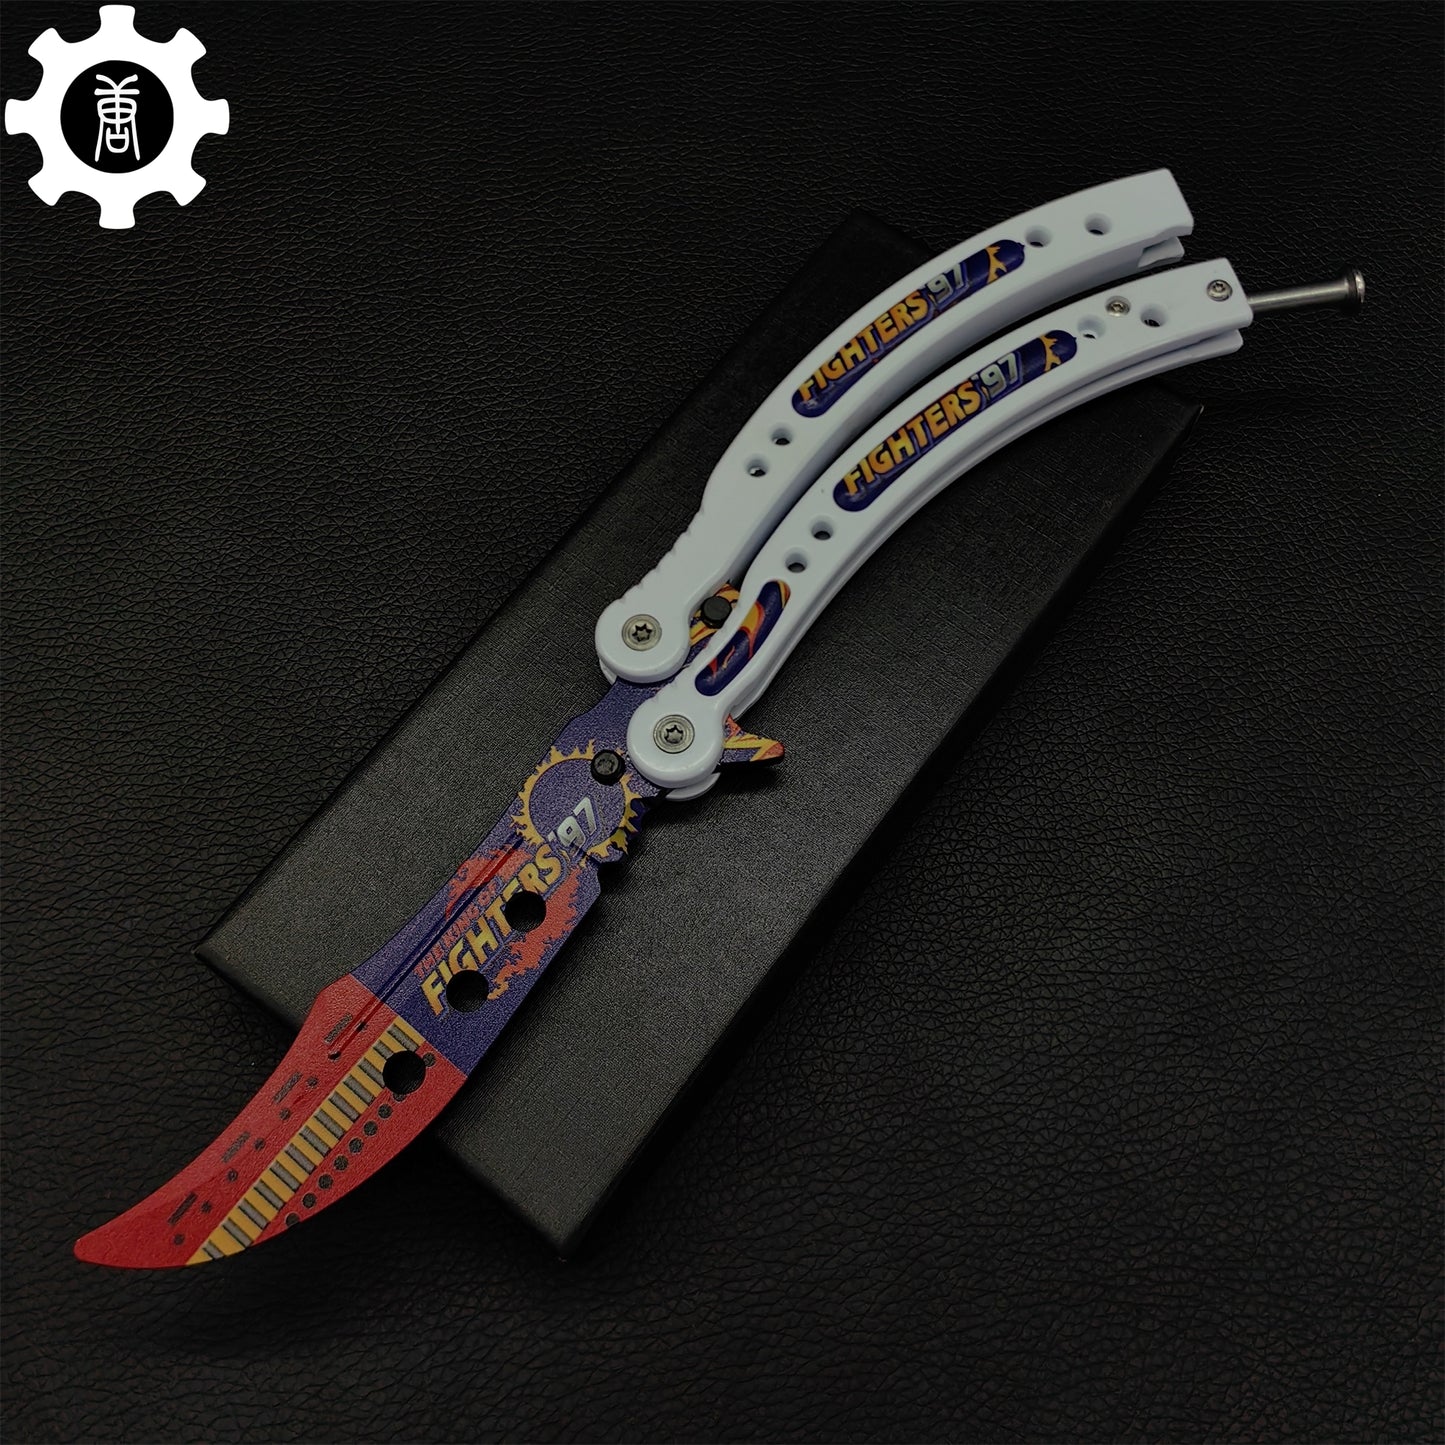 Fighter Butterfly Knife White Handle Metal Balisong Trainer